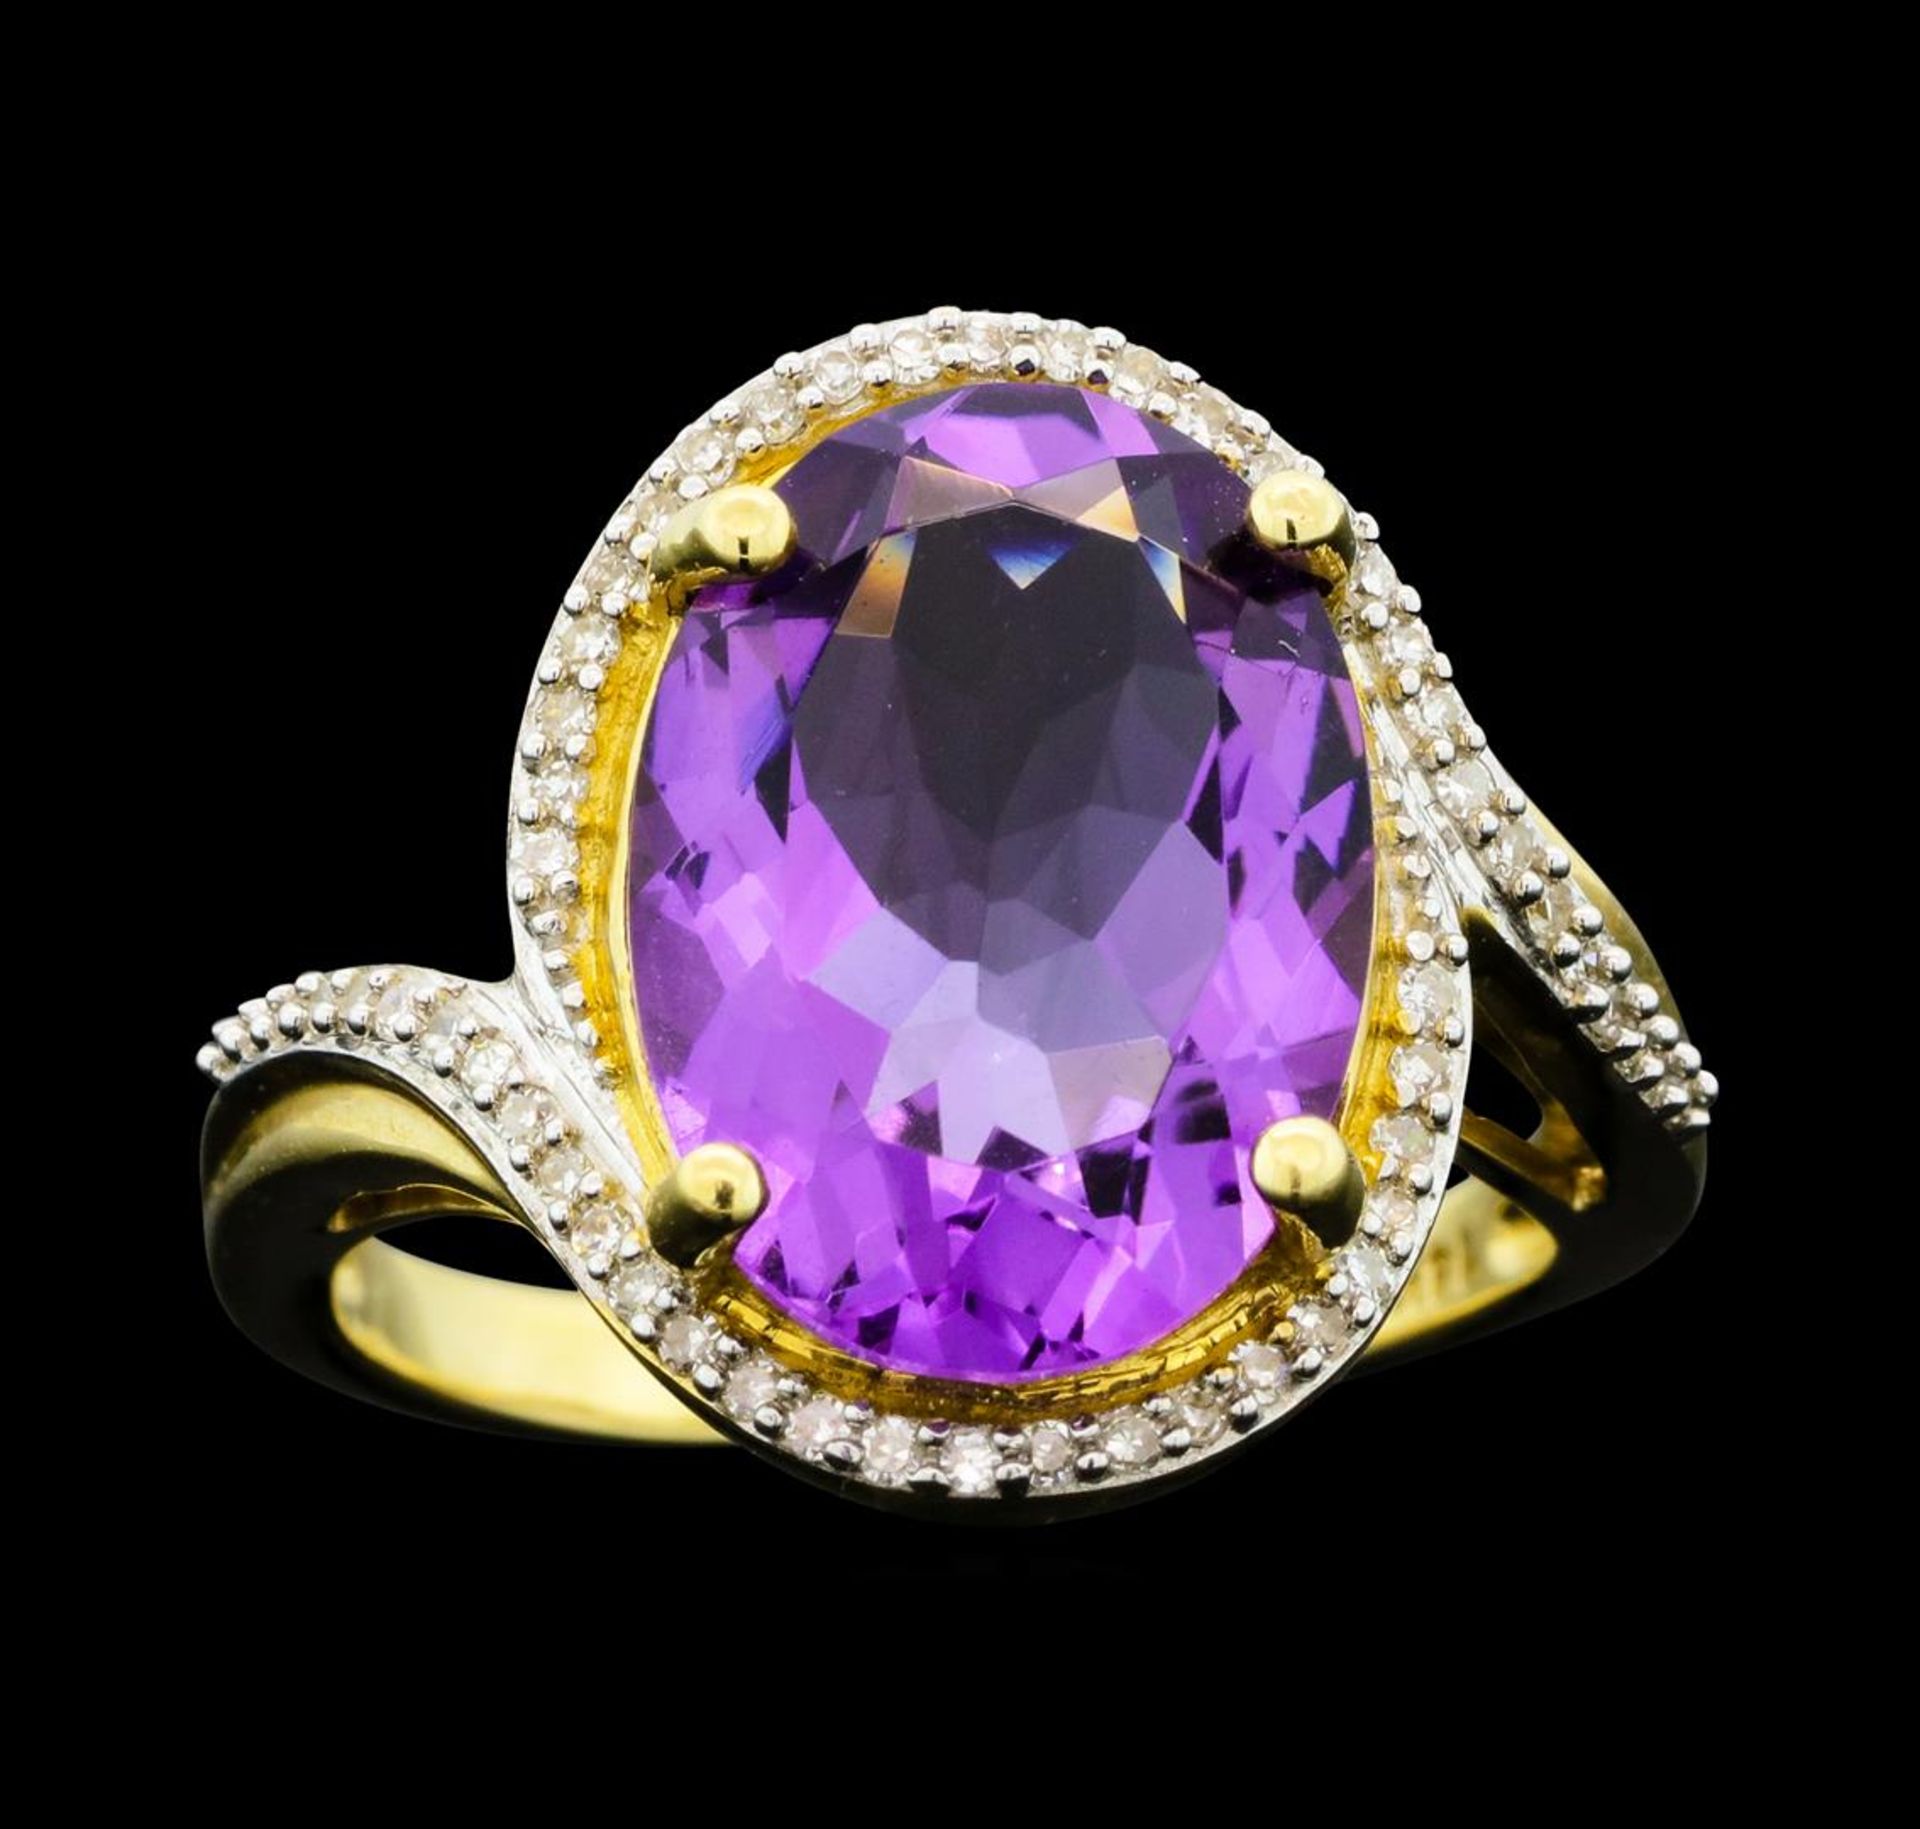 4.90 ctw Amethyst And Diamond Ring - 14KT Yellow Gold - Image 2 of 5